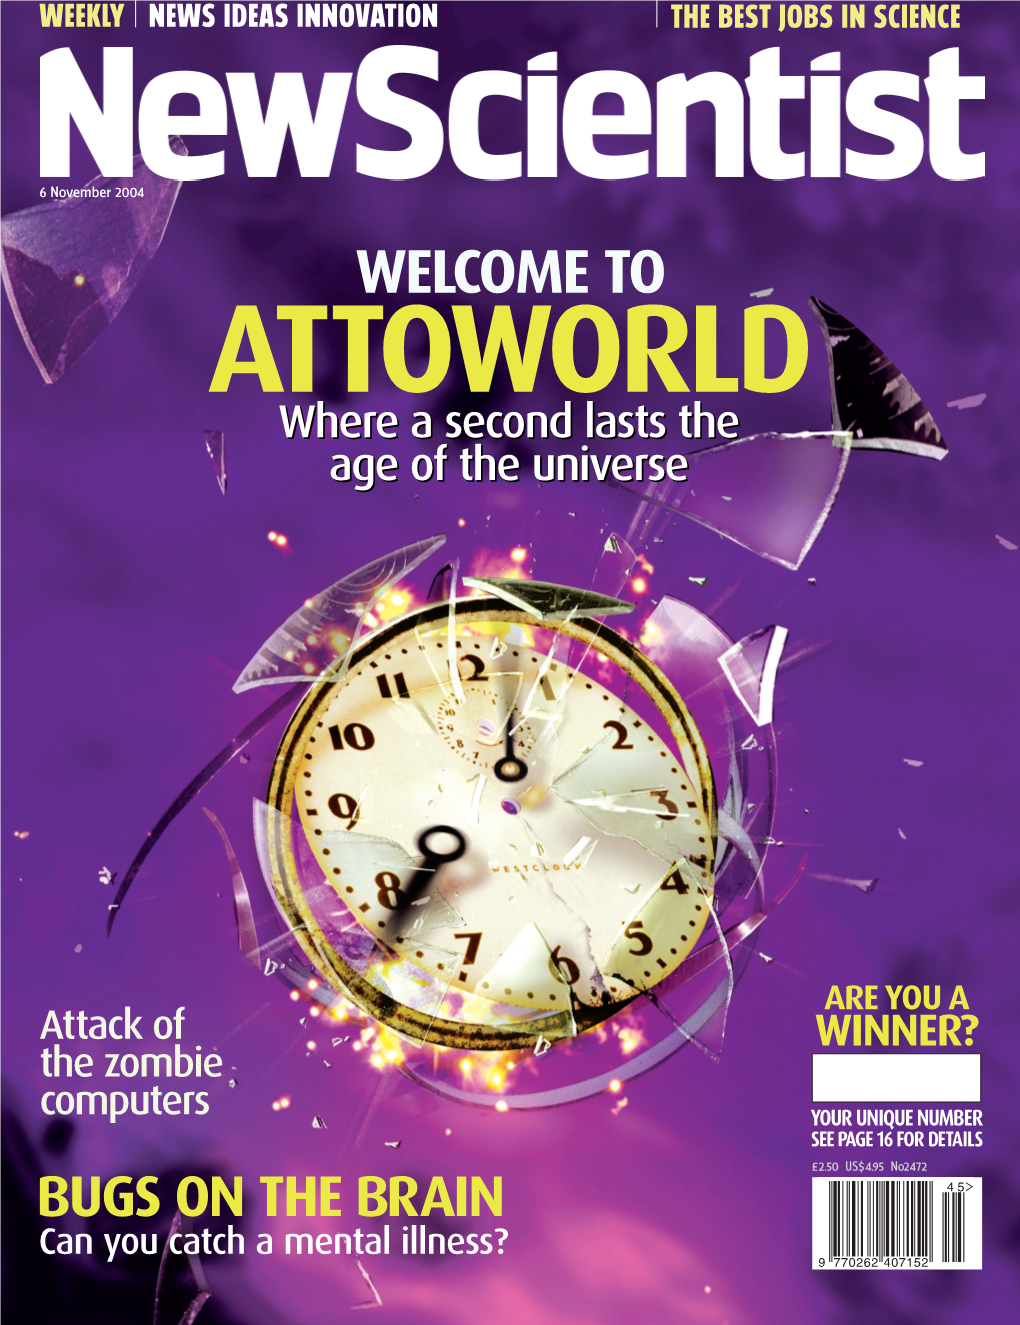 WELCOME to ATTOWORLD Where a Second Lasts the Age of the Universe